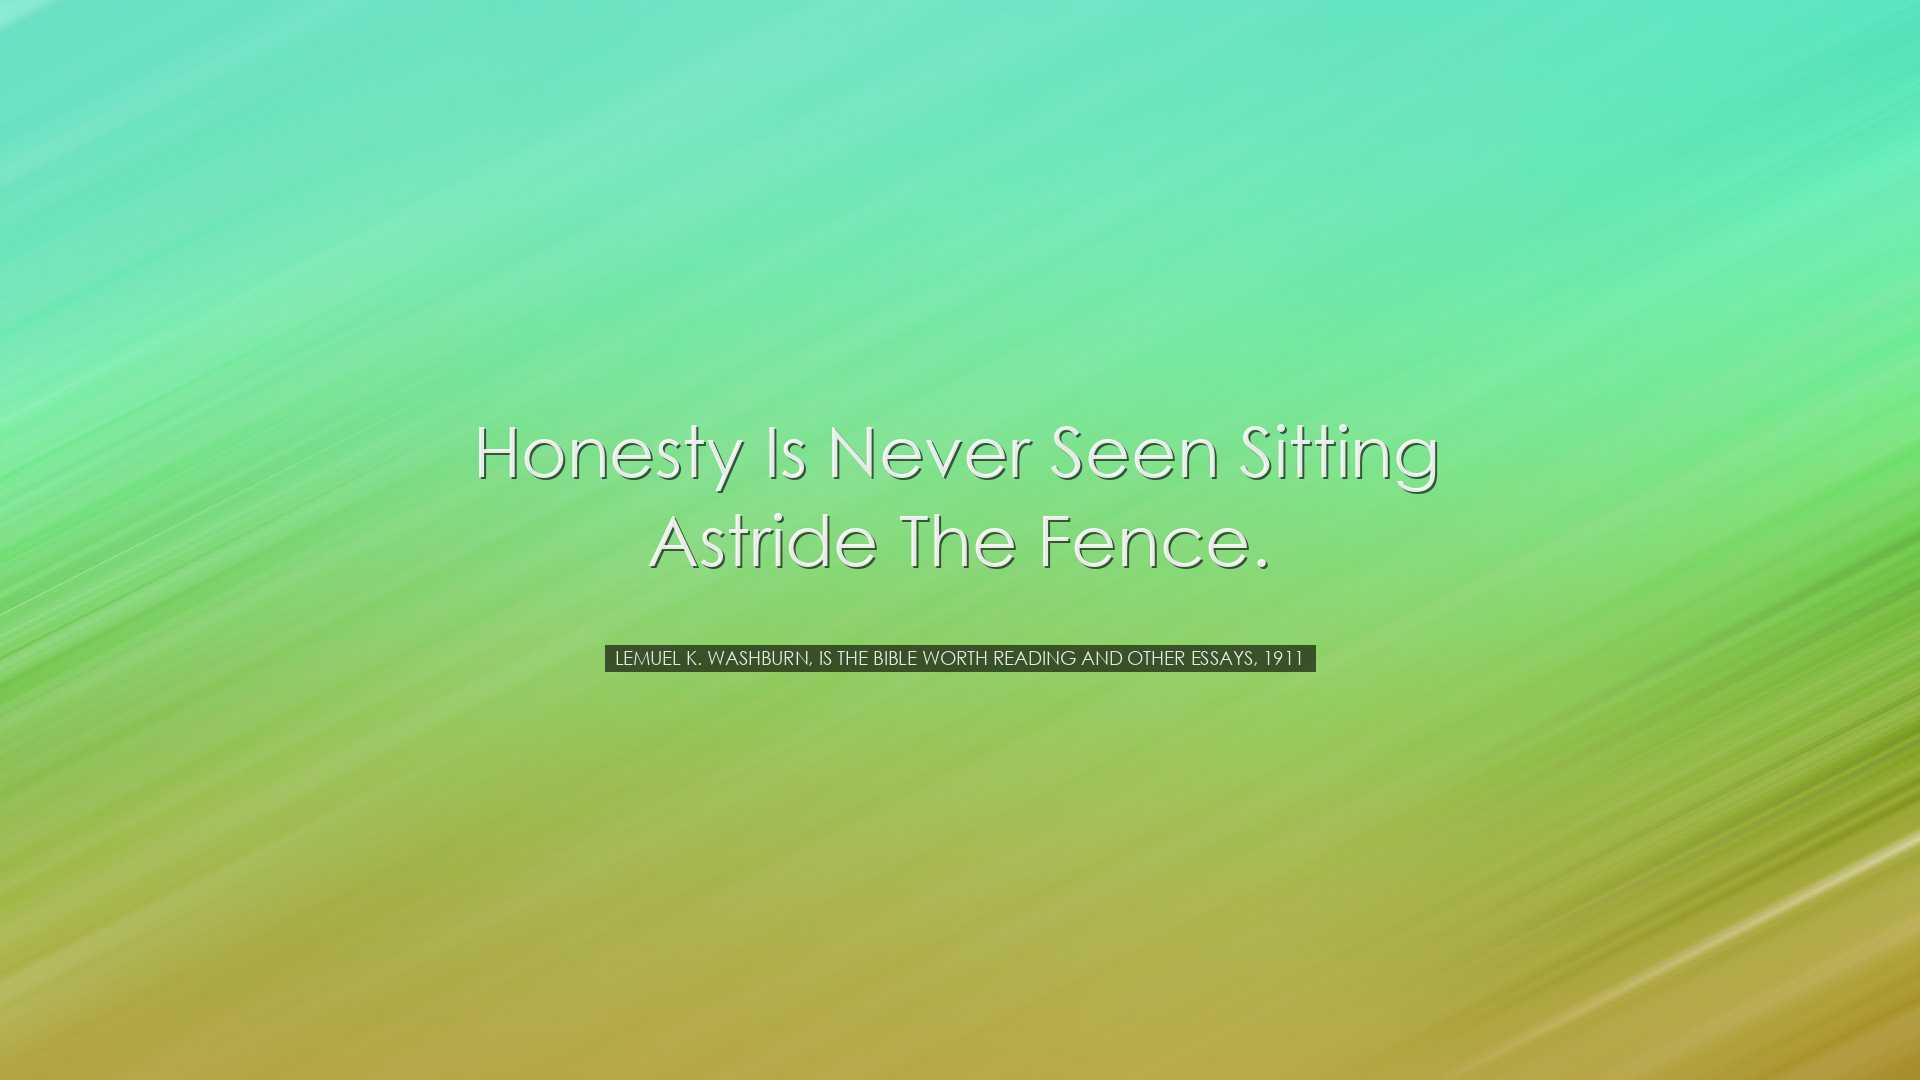 Honesty is never seen sitting astride the fence. - Lemuel K. Washb